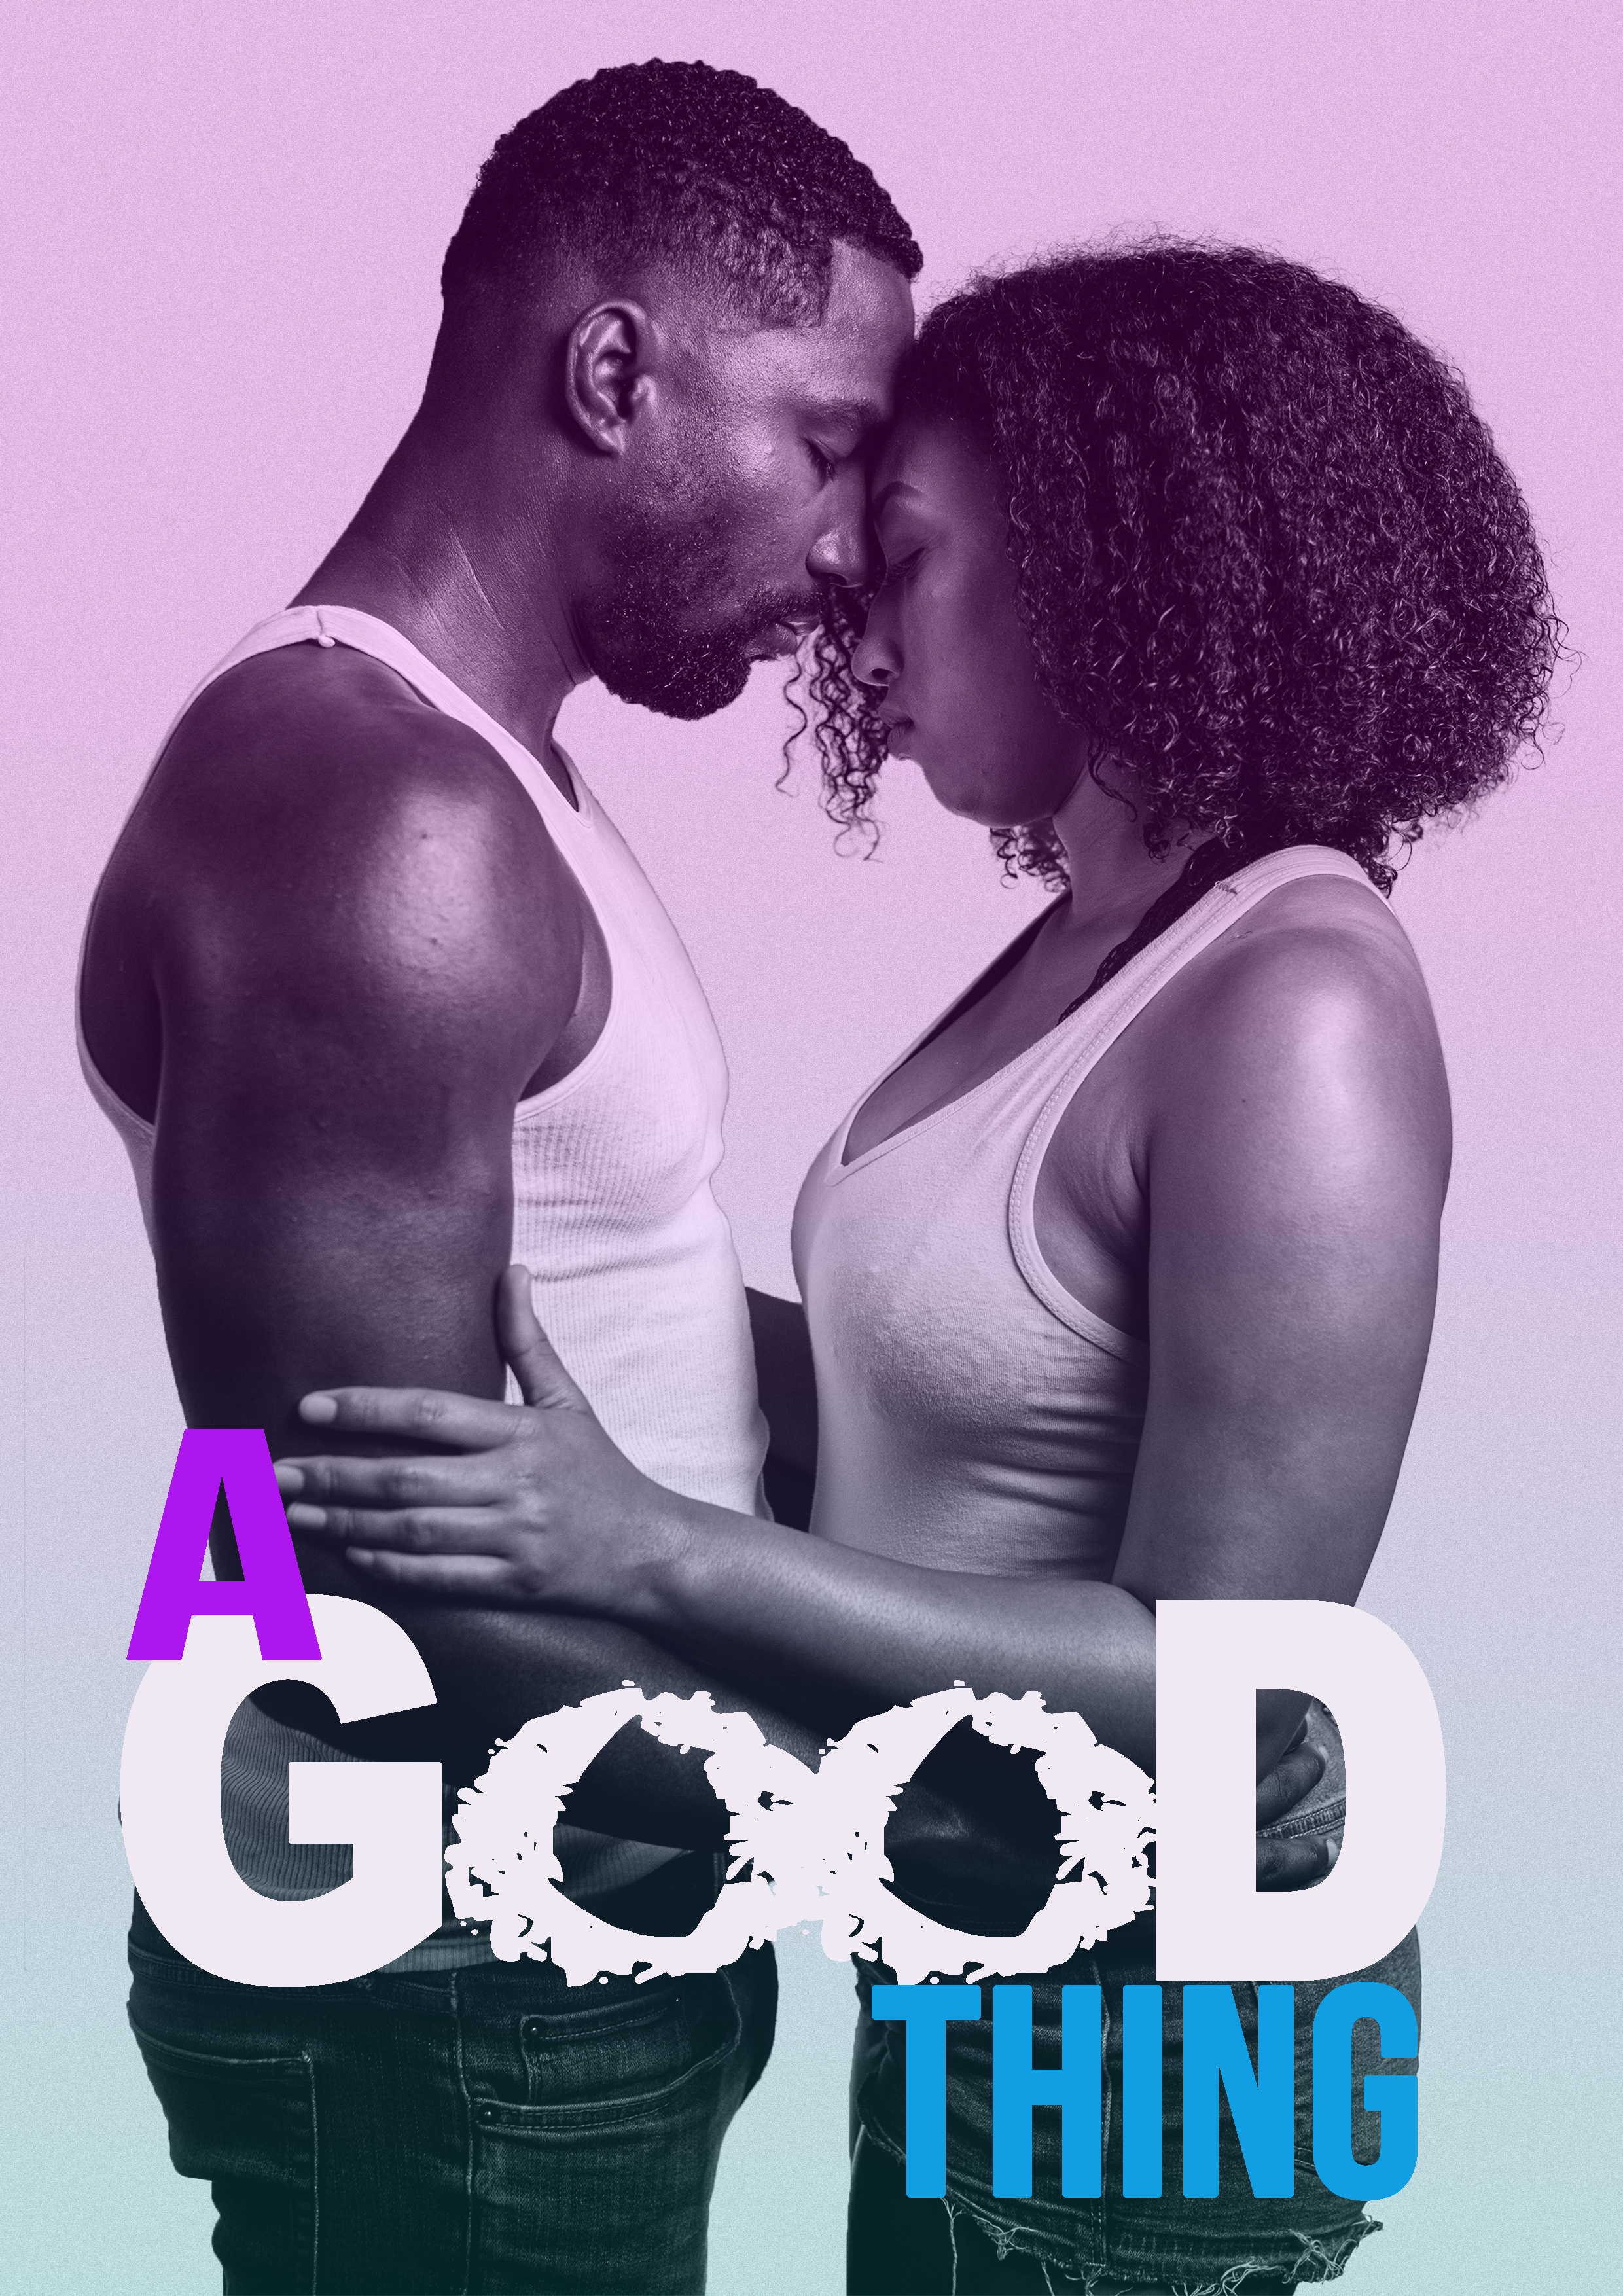 A Good Thing (2020)